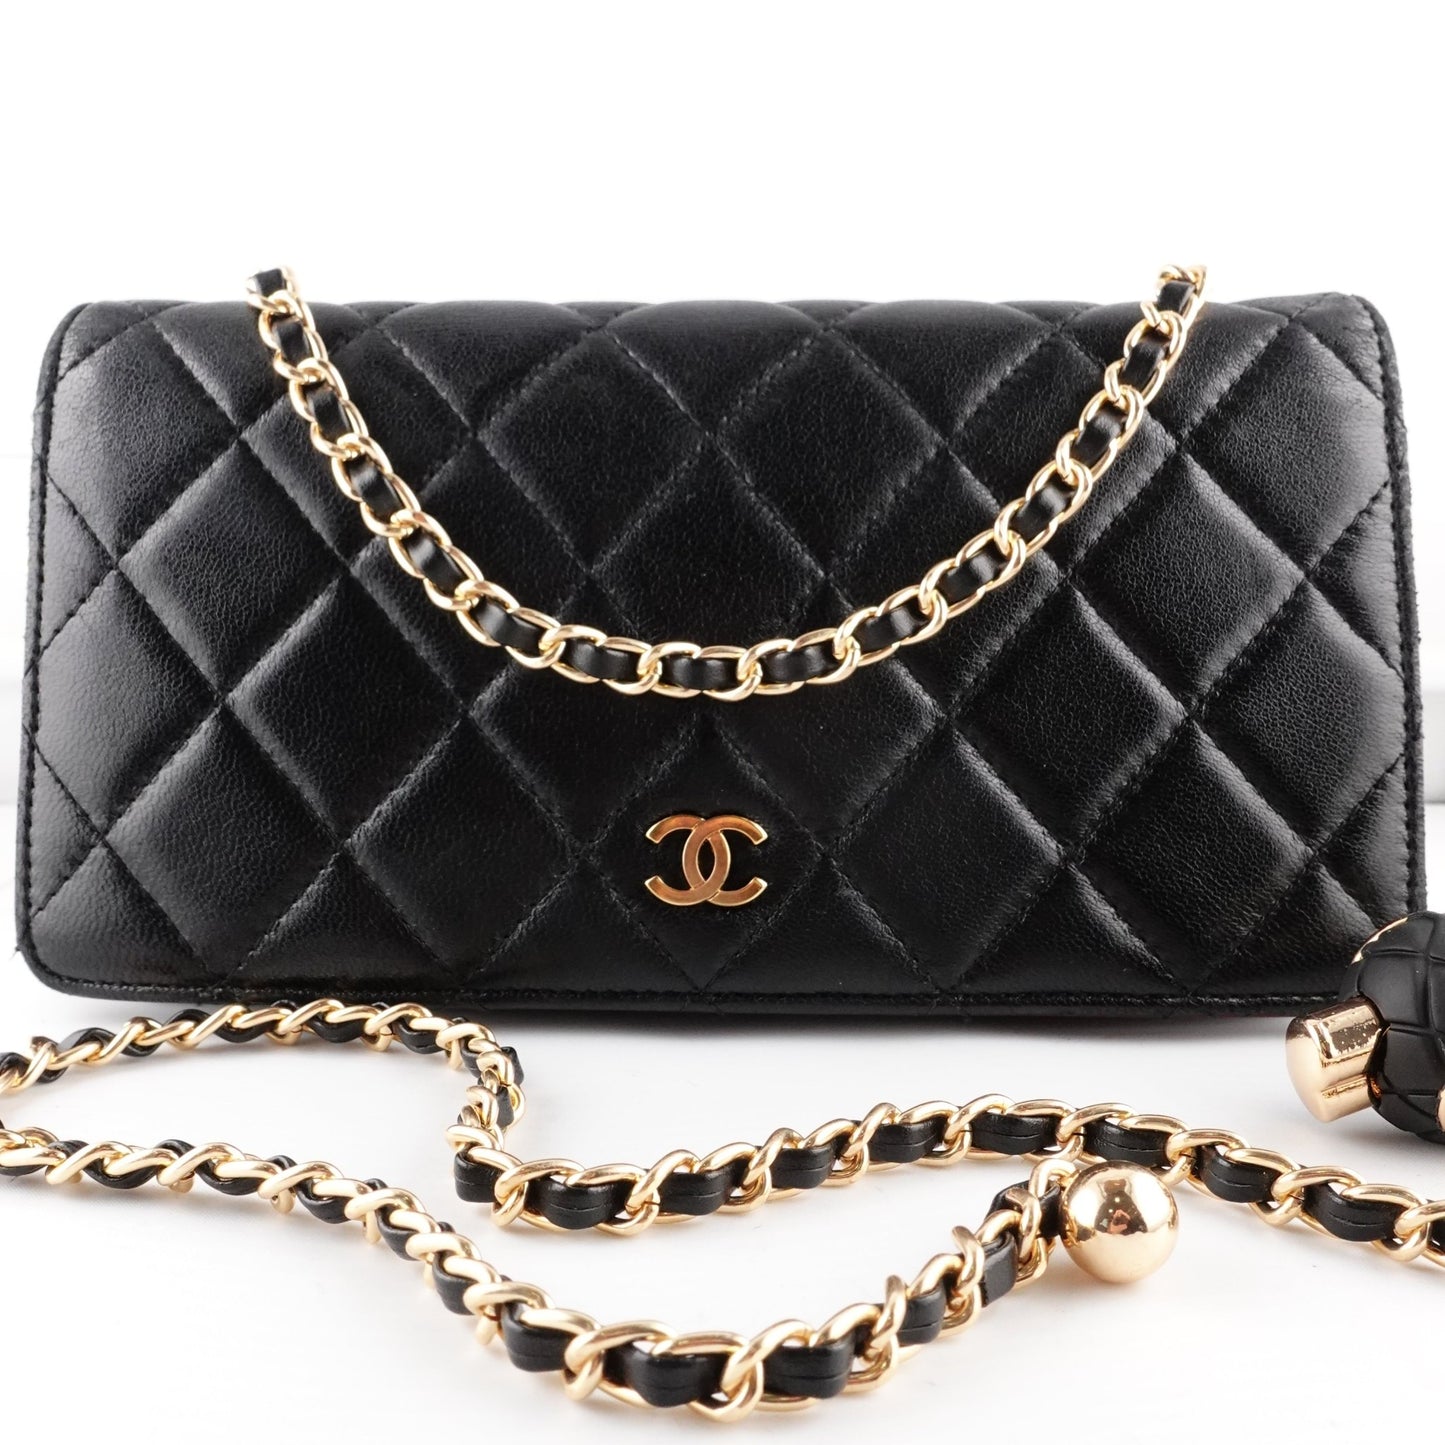 CHANEL Lambskin Bifold Wallet with Adjustable Chain - Bag Envy